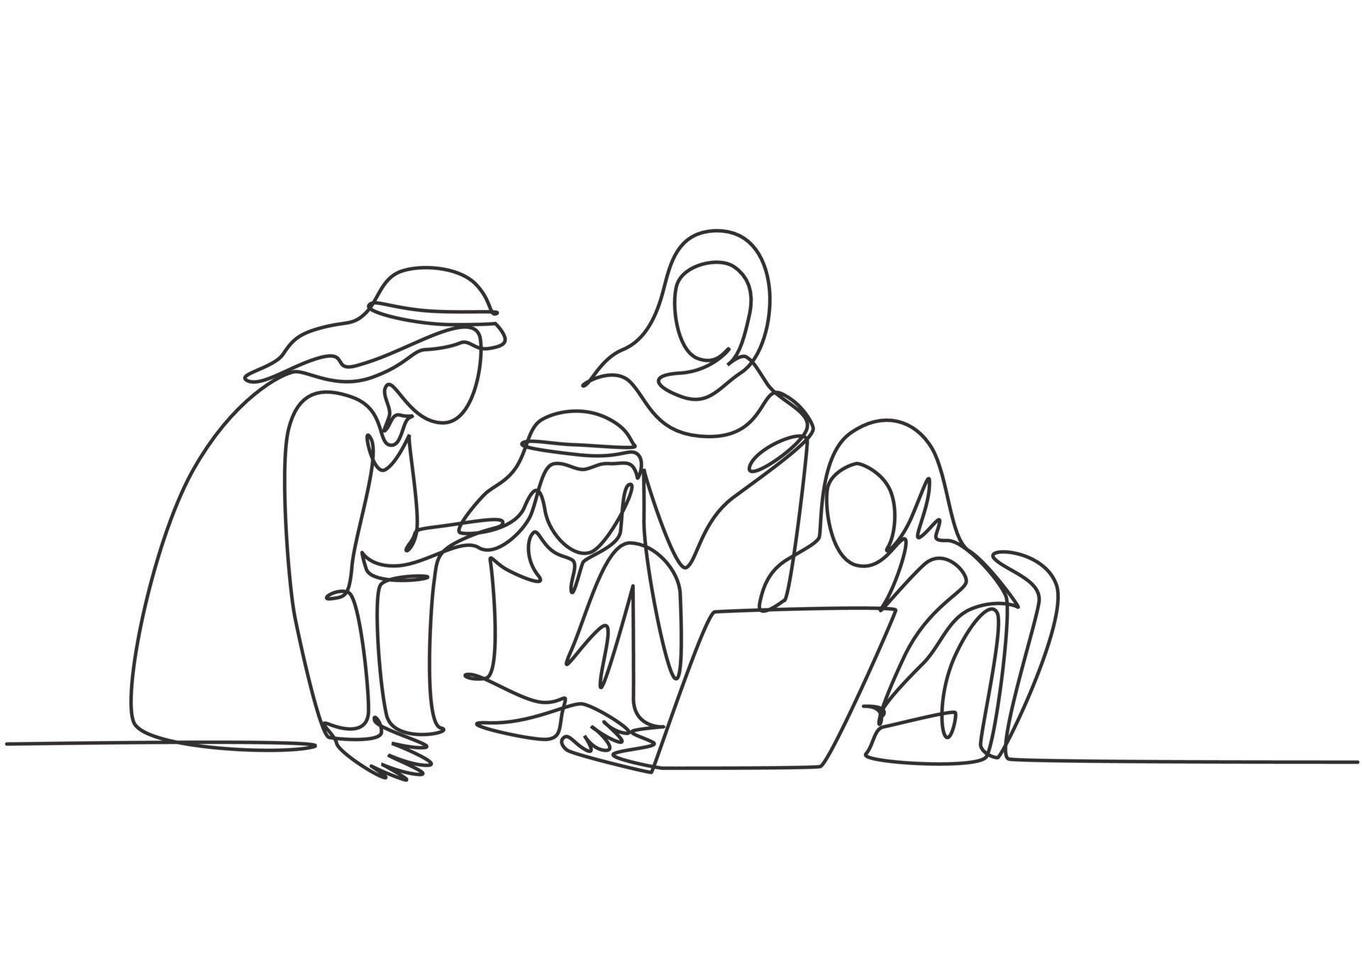 One single line drawing of young muslim business community discussing social project together. Saudi Arabia cloth shmag, headscarf, ghutra, hijab, veil. Continuous line draw design vector illustration